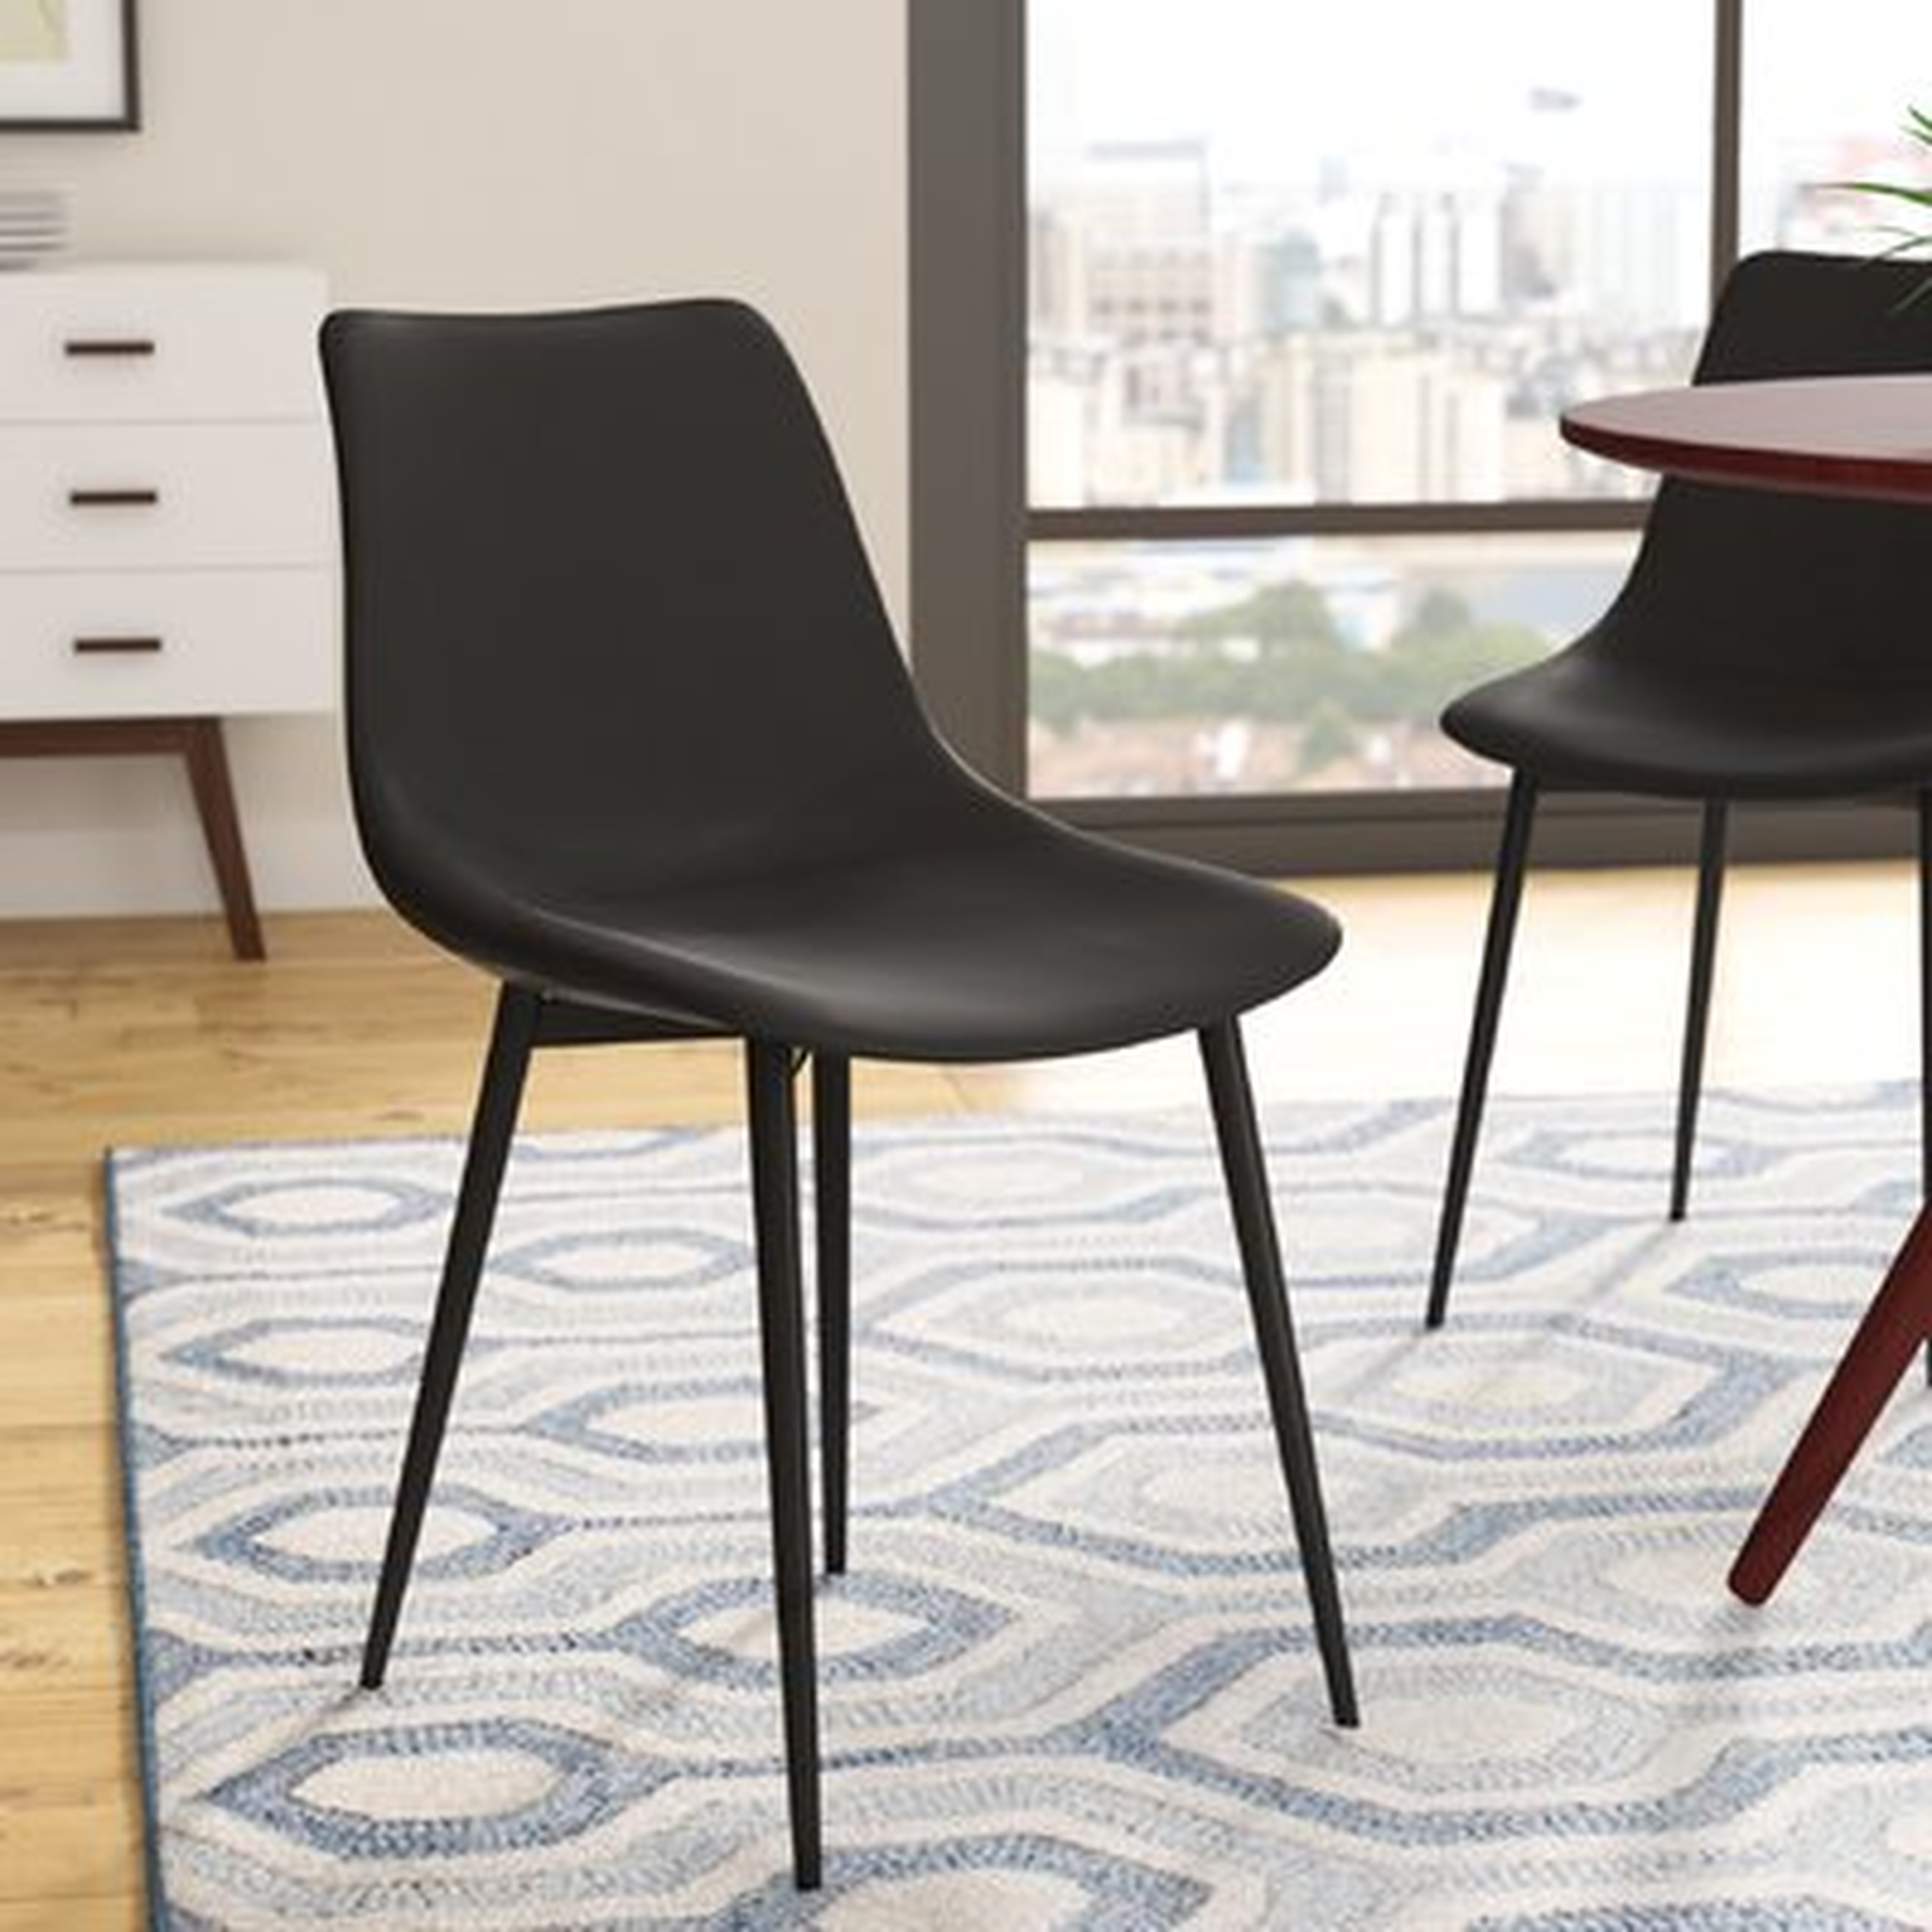 Shewmaker Upholstered Dining Chair, Charcoal - Wayfair